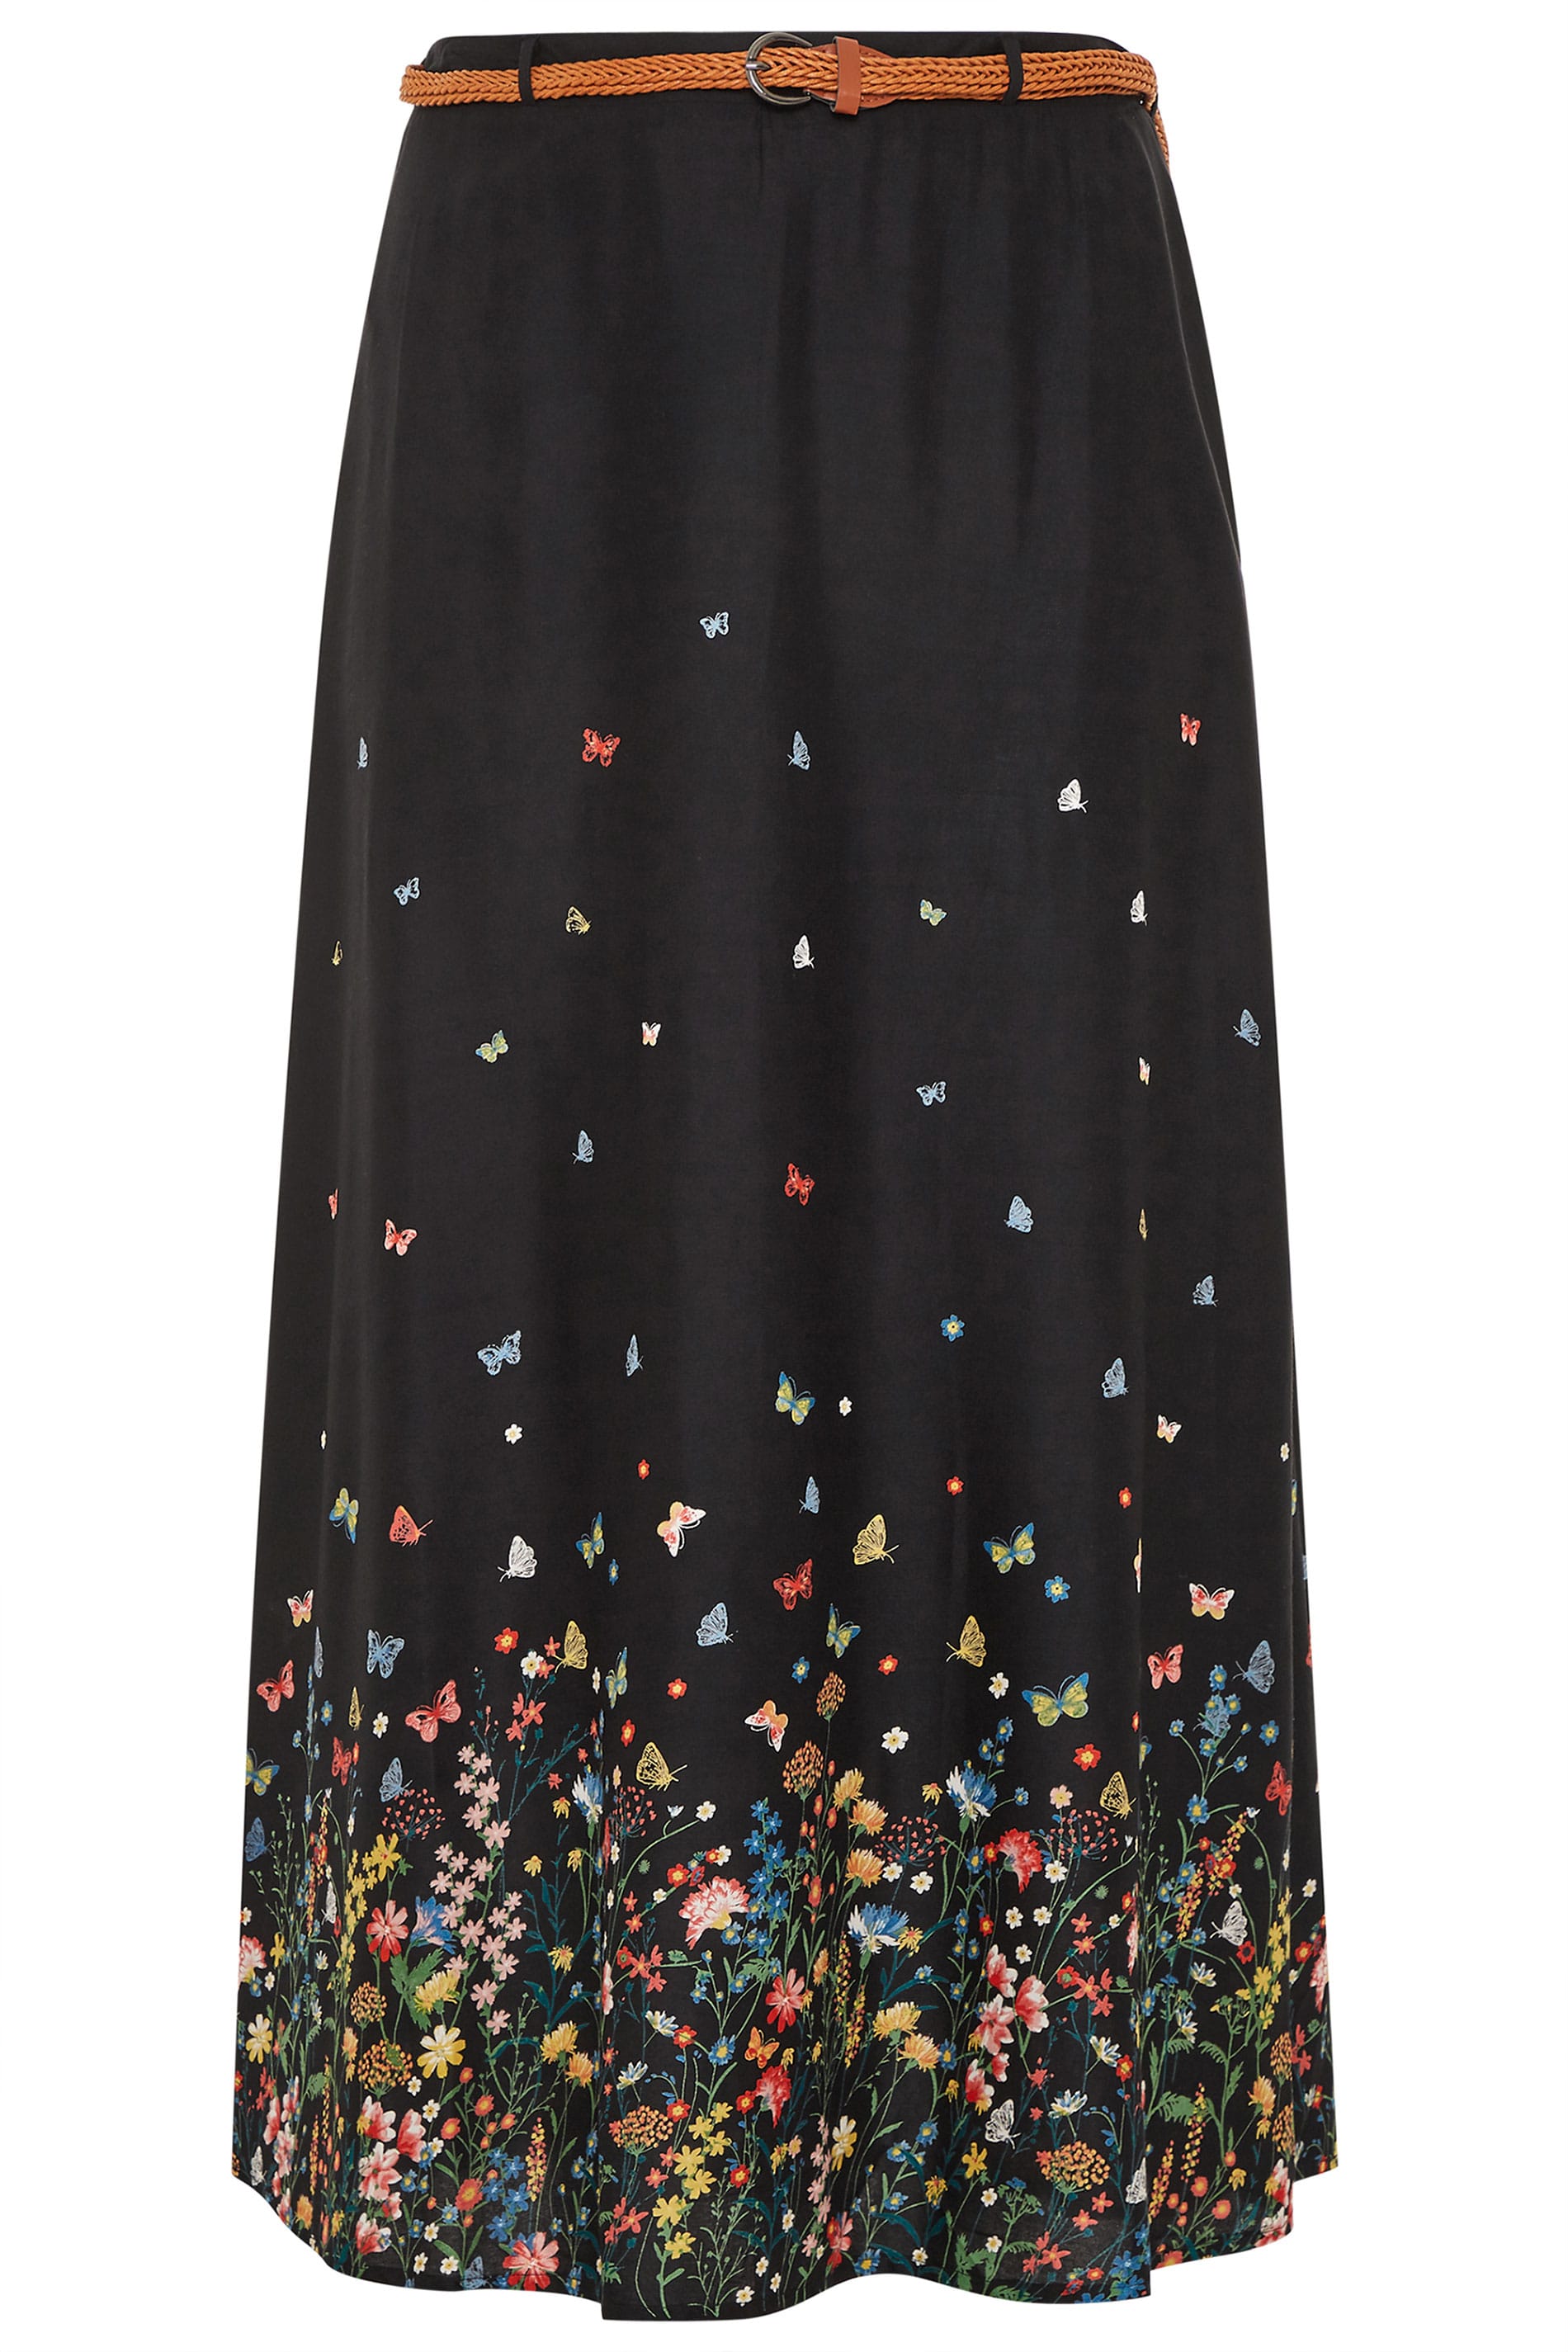 Black Floral Butterfly Maxi Skirt With Belt | Yours Clothing